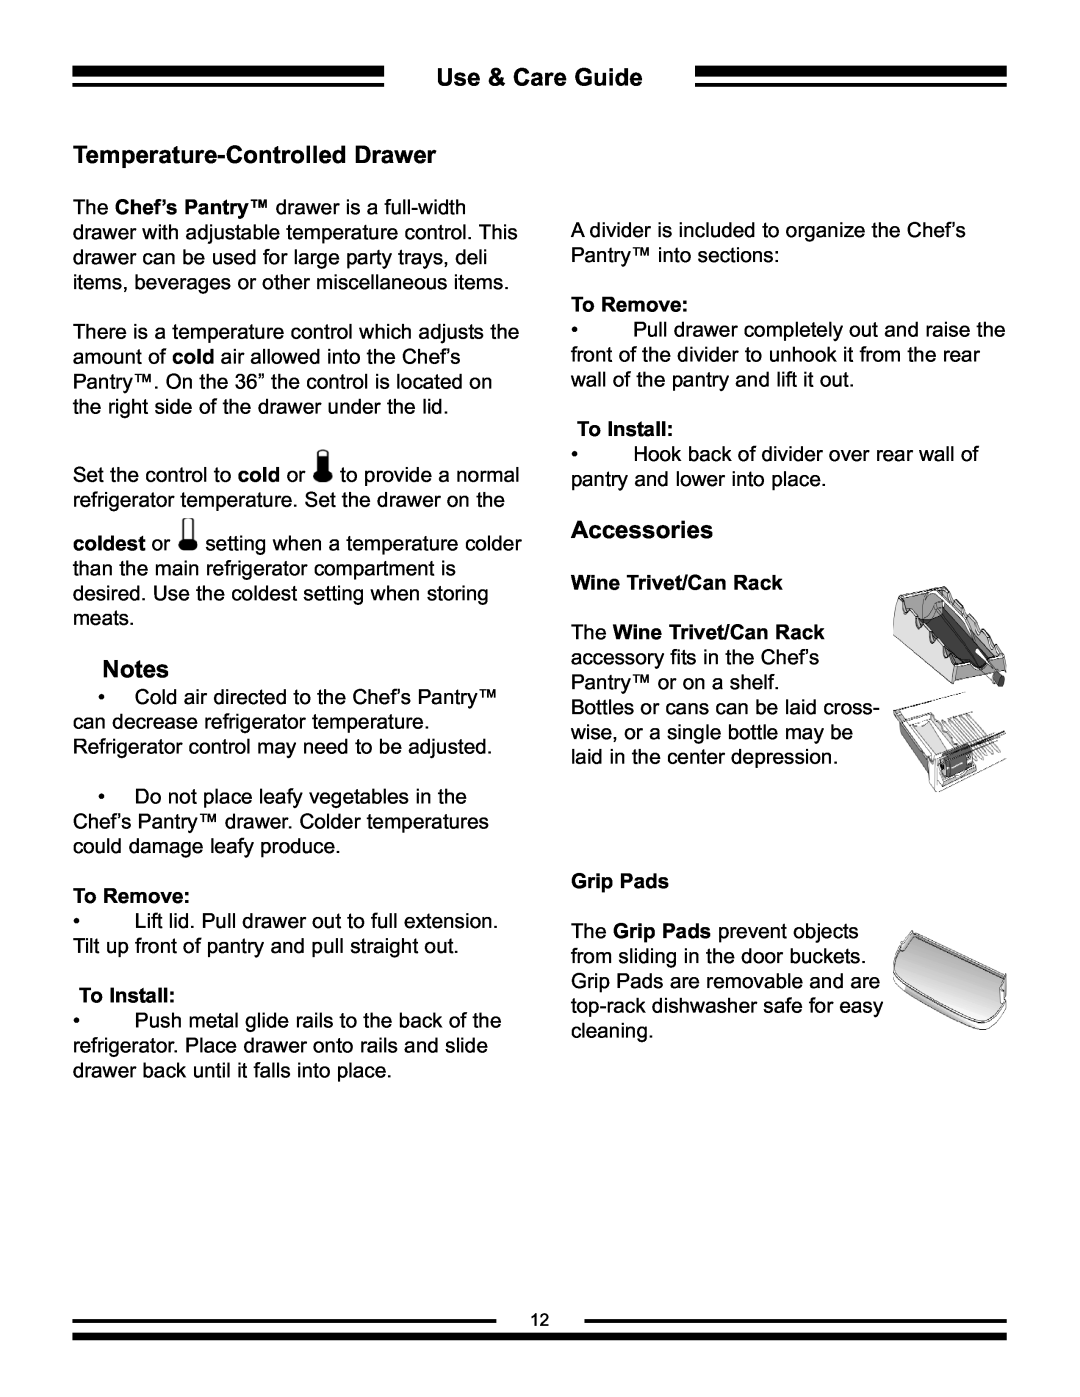 Aga Ranges AFHR-36 manual Temperature-Controlled Drawer, Accessories, Use & Care Guide 